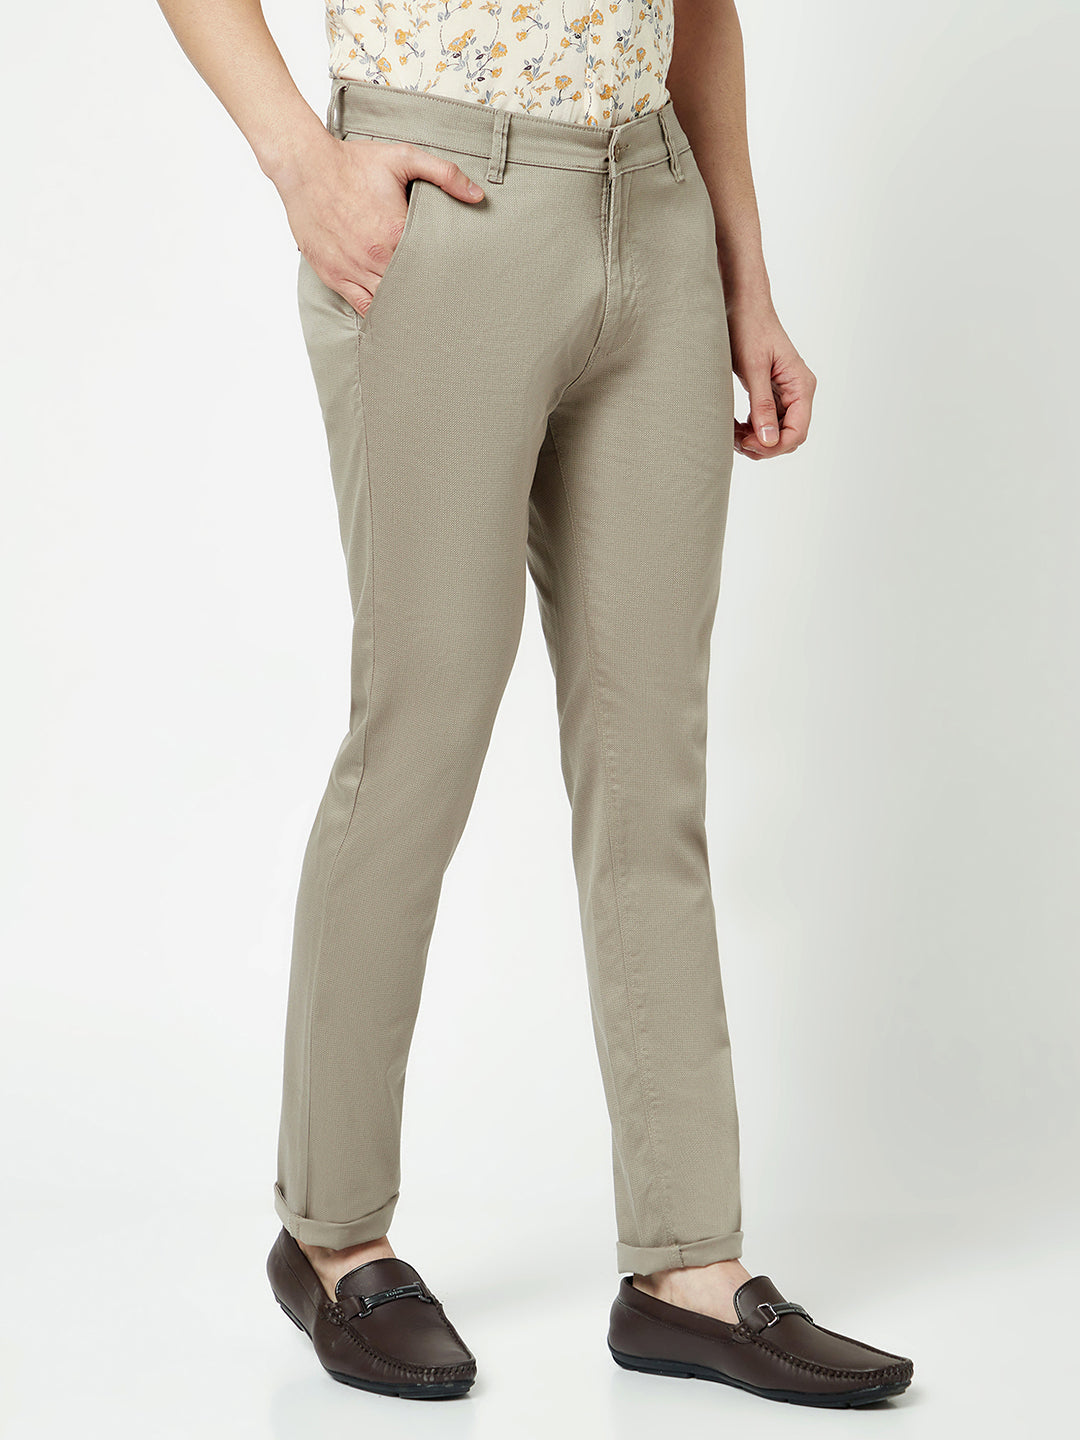  Grey Textured Chino Trousers